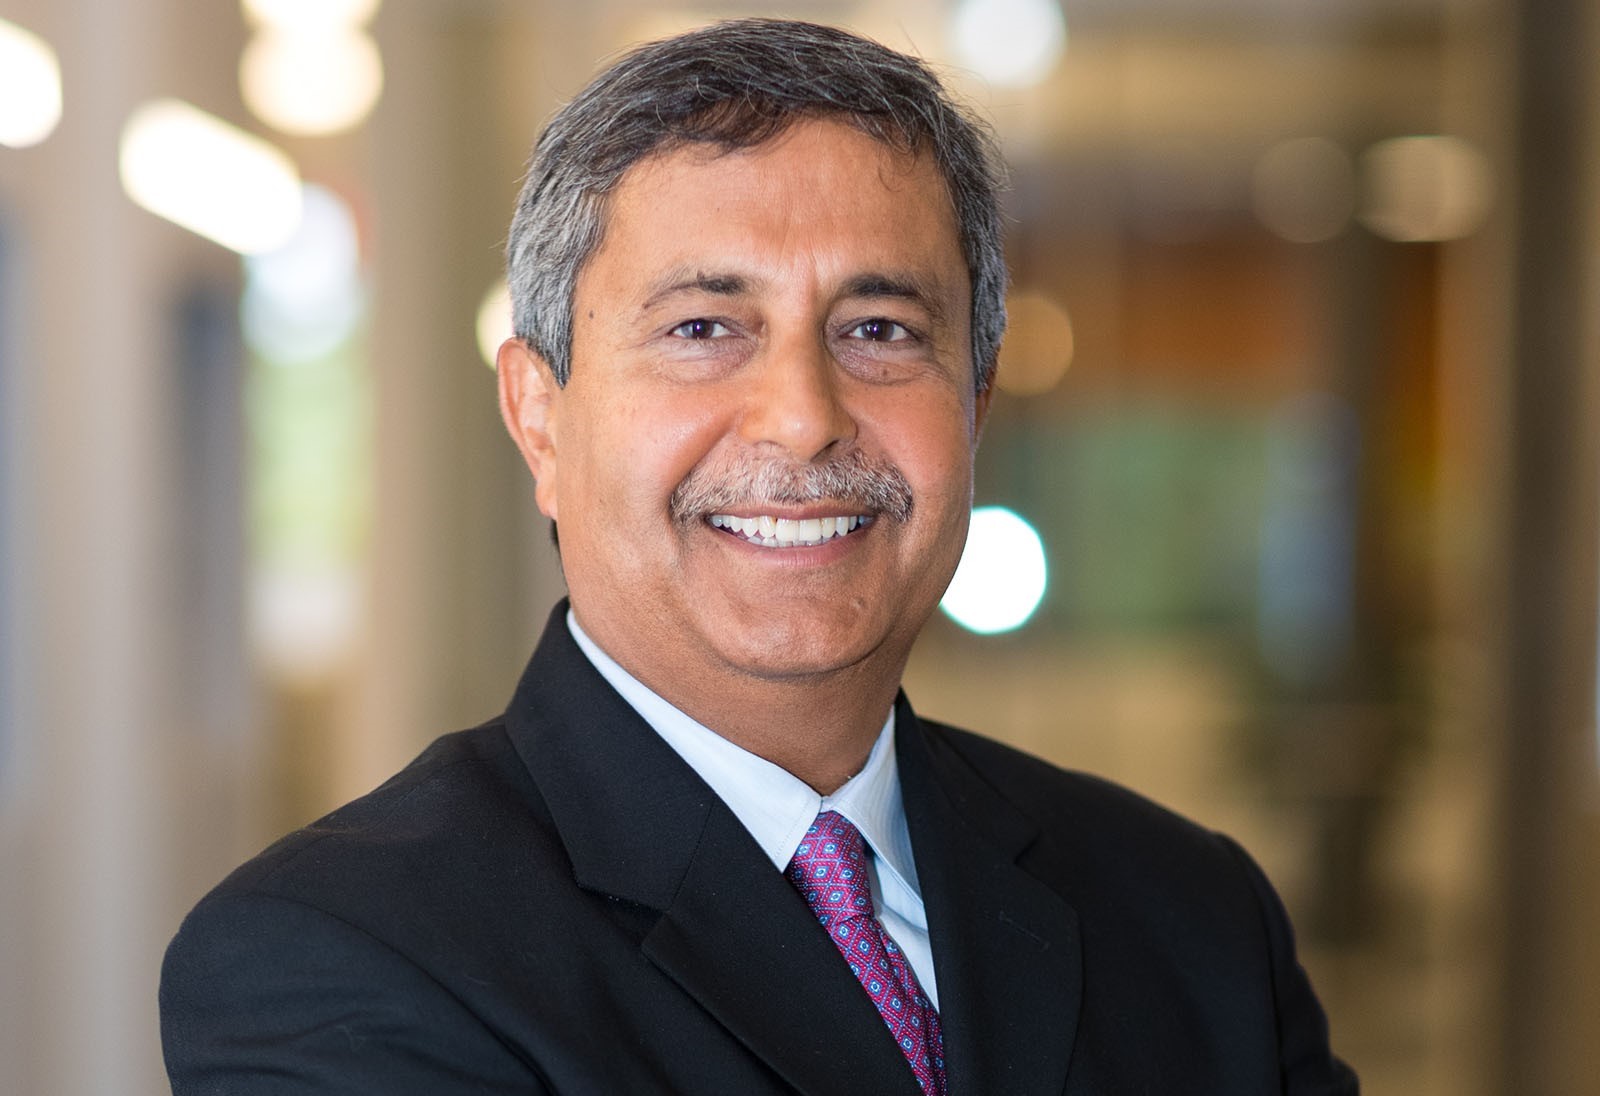 Sanjay Mehrotra, president and CEO, Micron to receive honorary doctorate